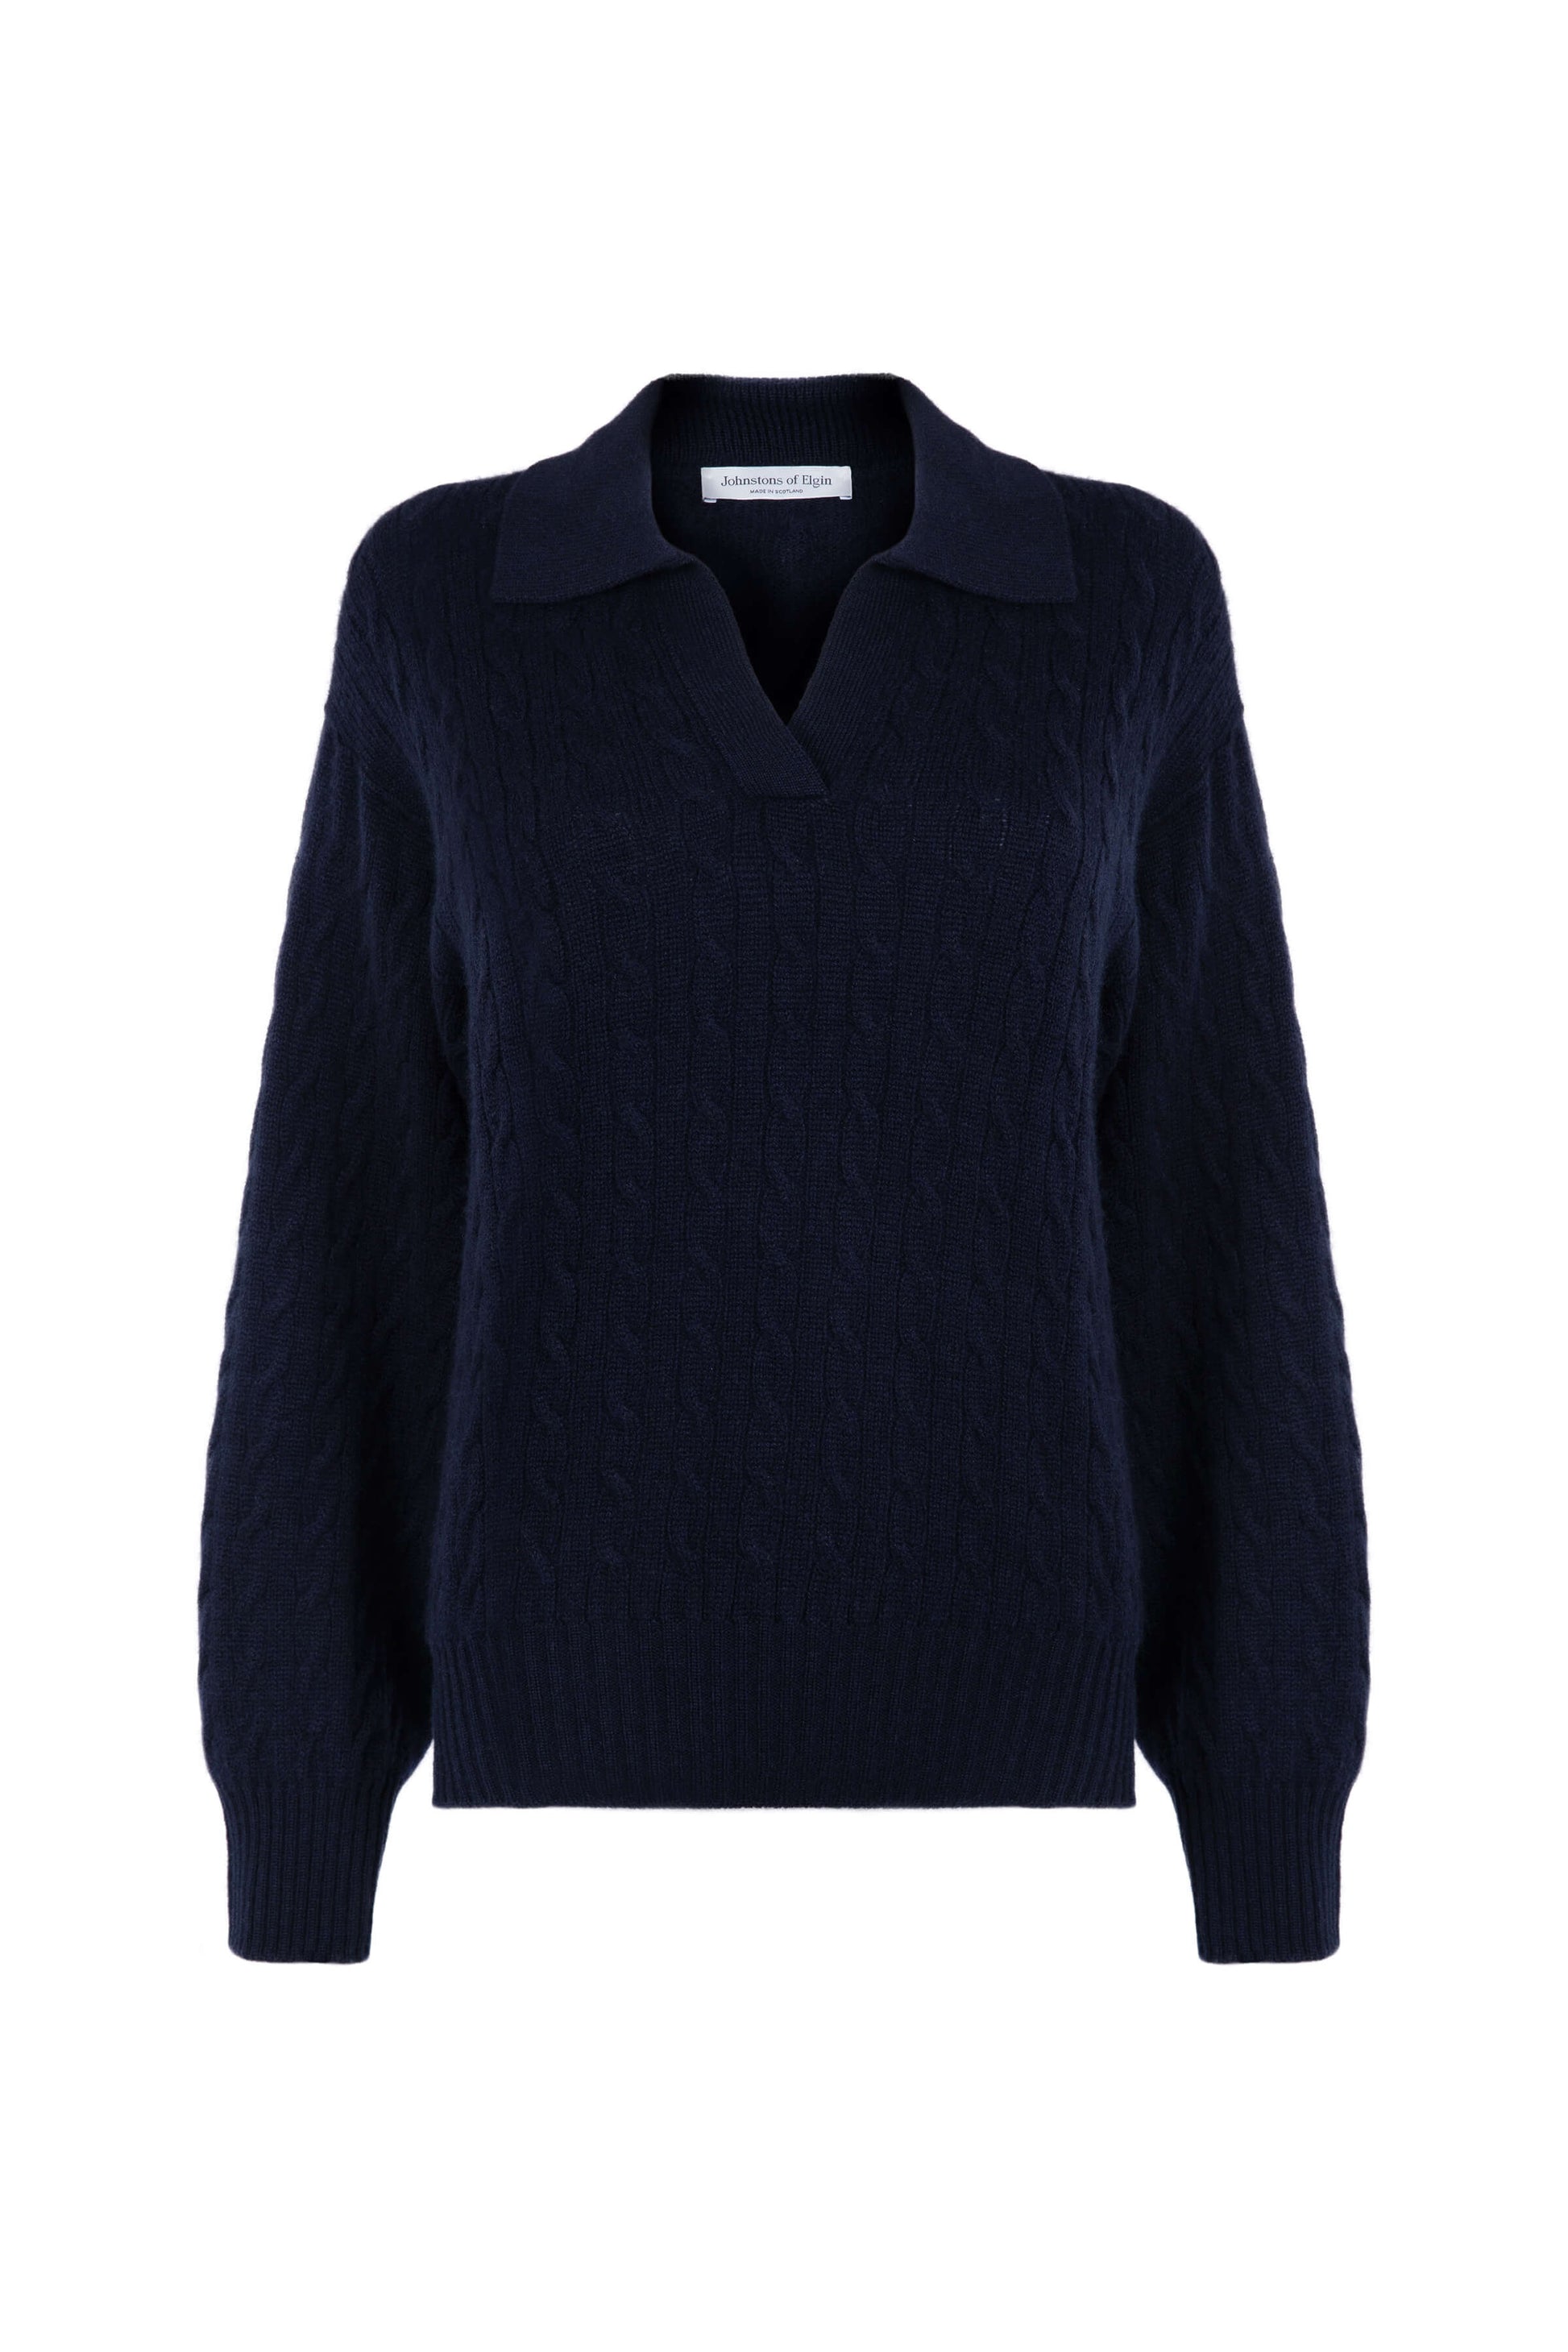 Johnstons of Elgin SS24 Women's Knitwear Dark Navy Cropped Cable Cashmere Sweater KAI05246SD7286